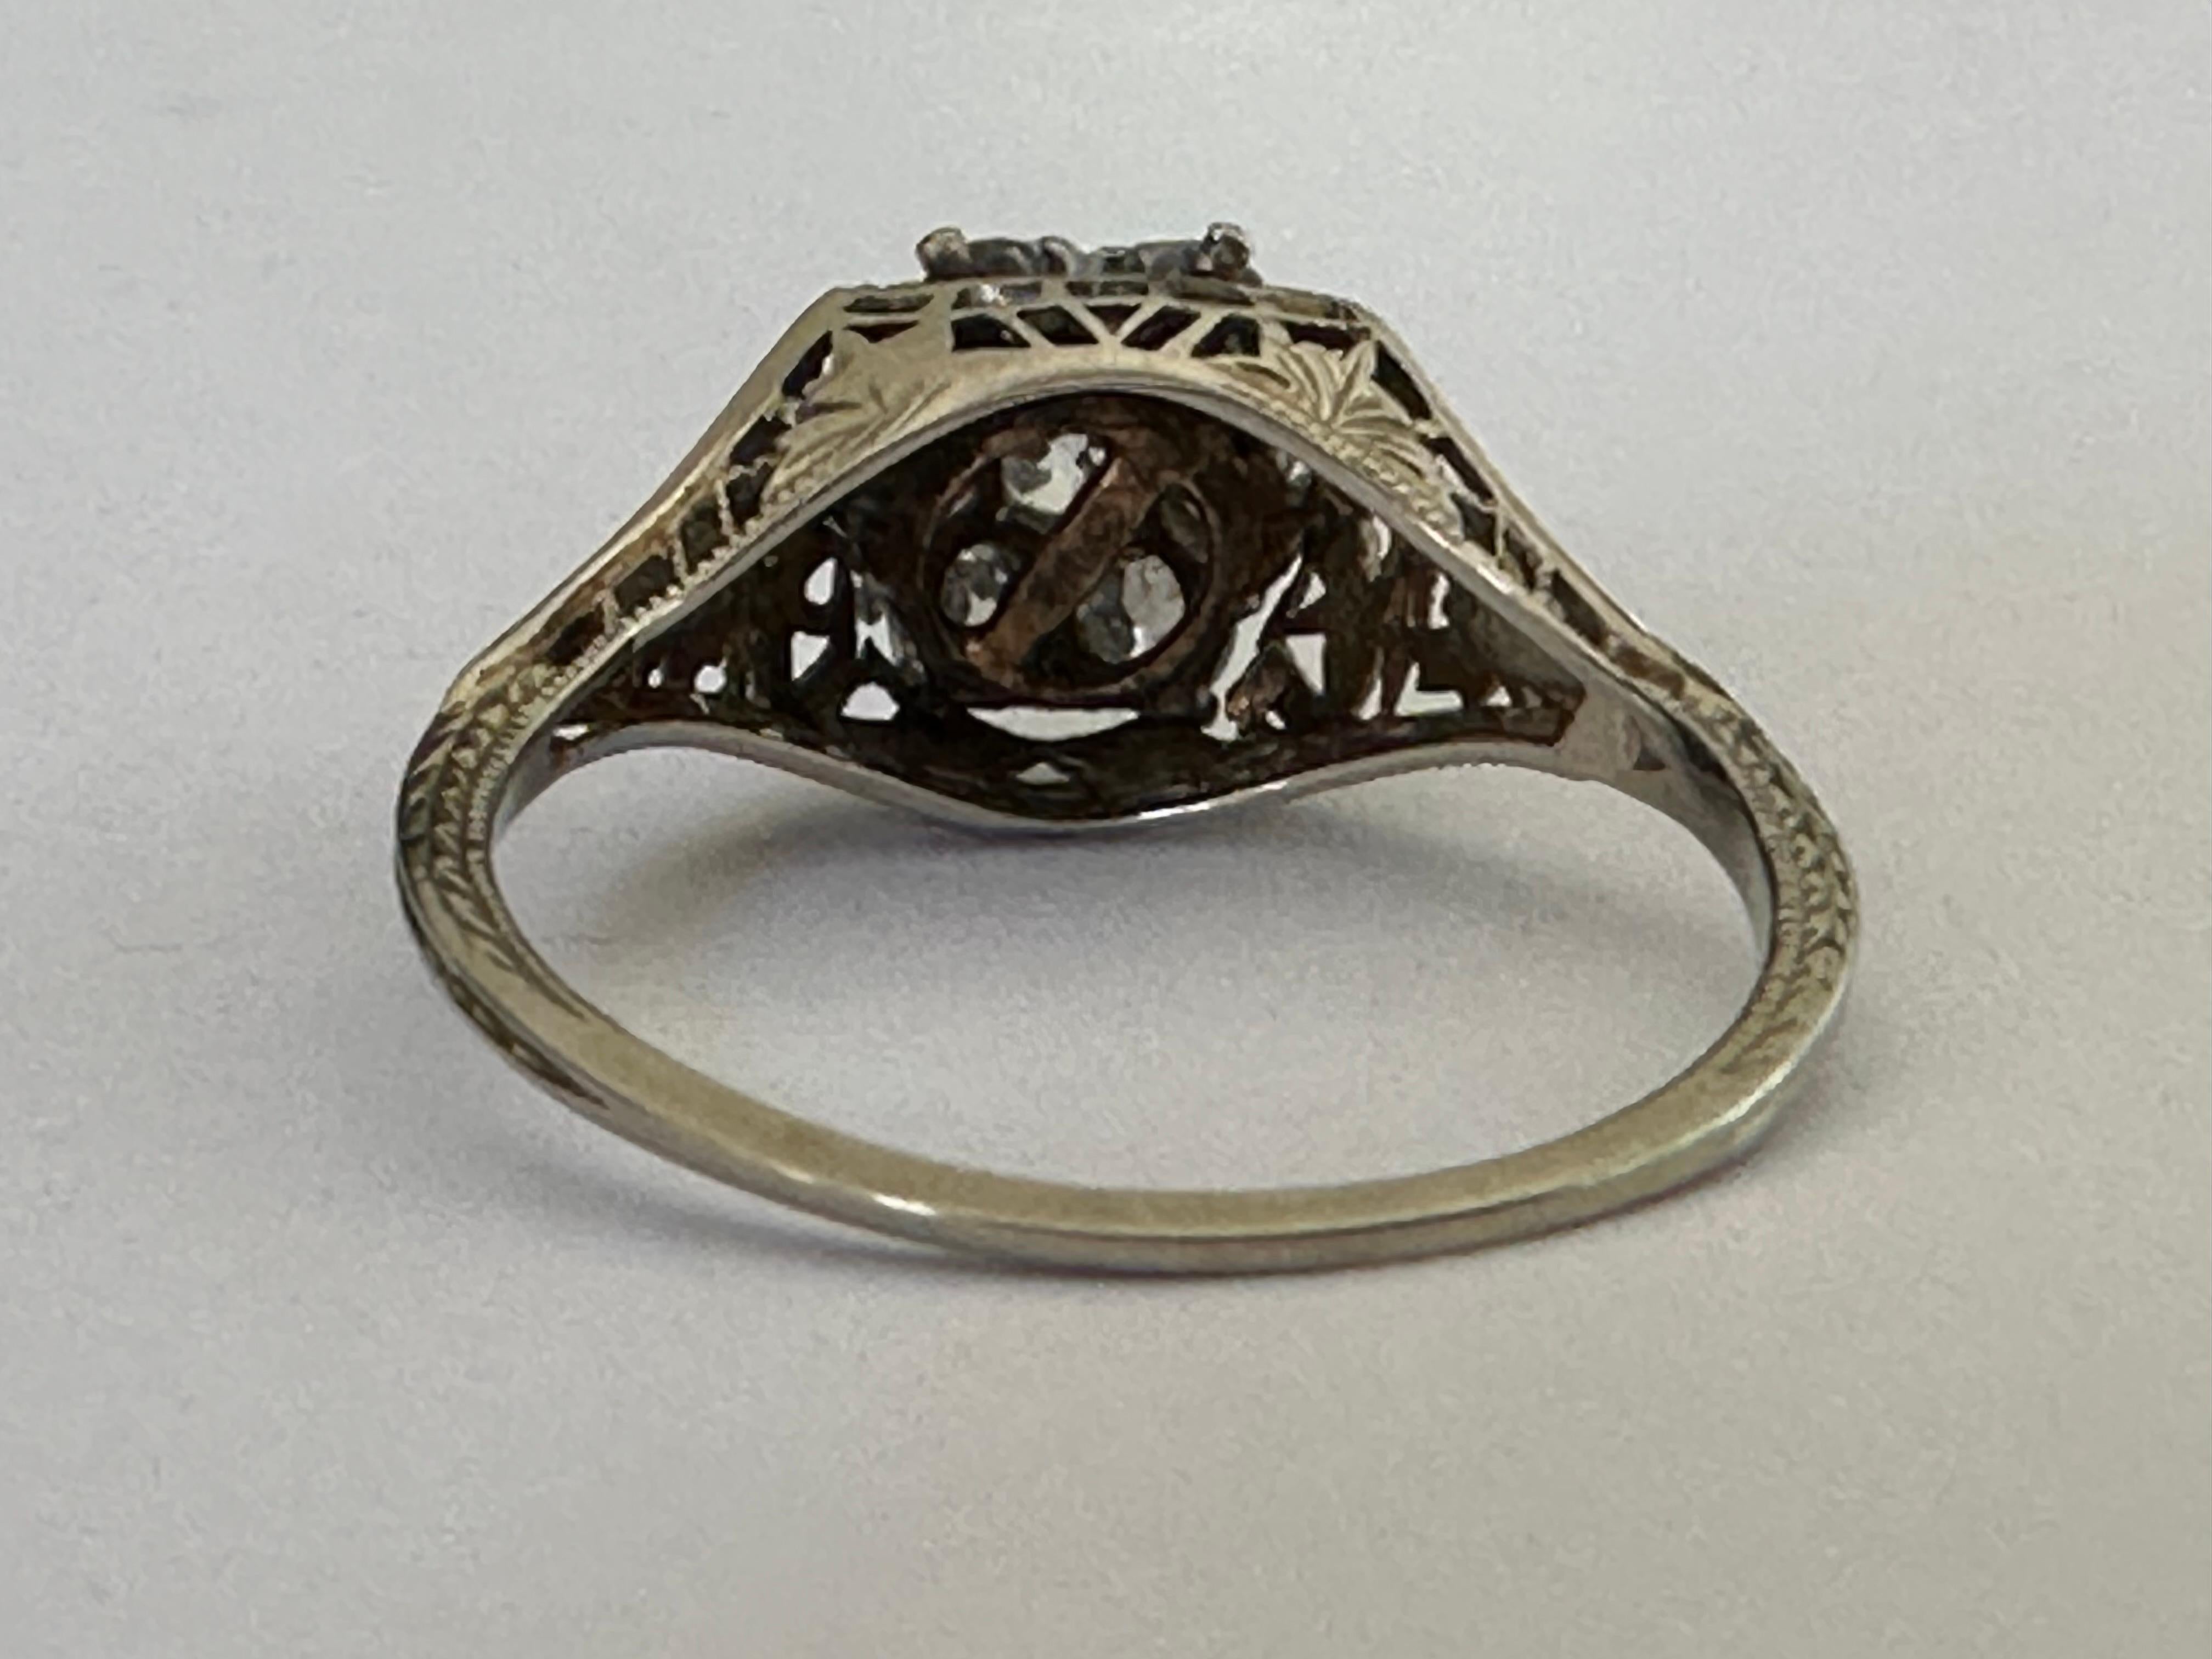 Antique Edwardian Diamond and Filigree Ring In Good Condition For Sale In Denver, CO